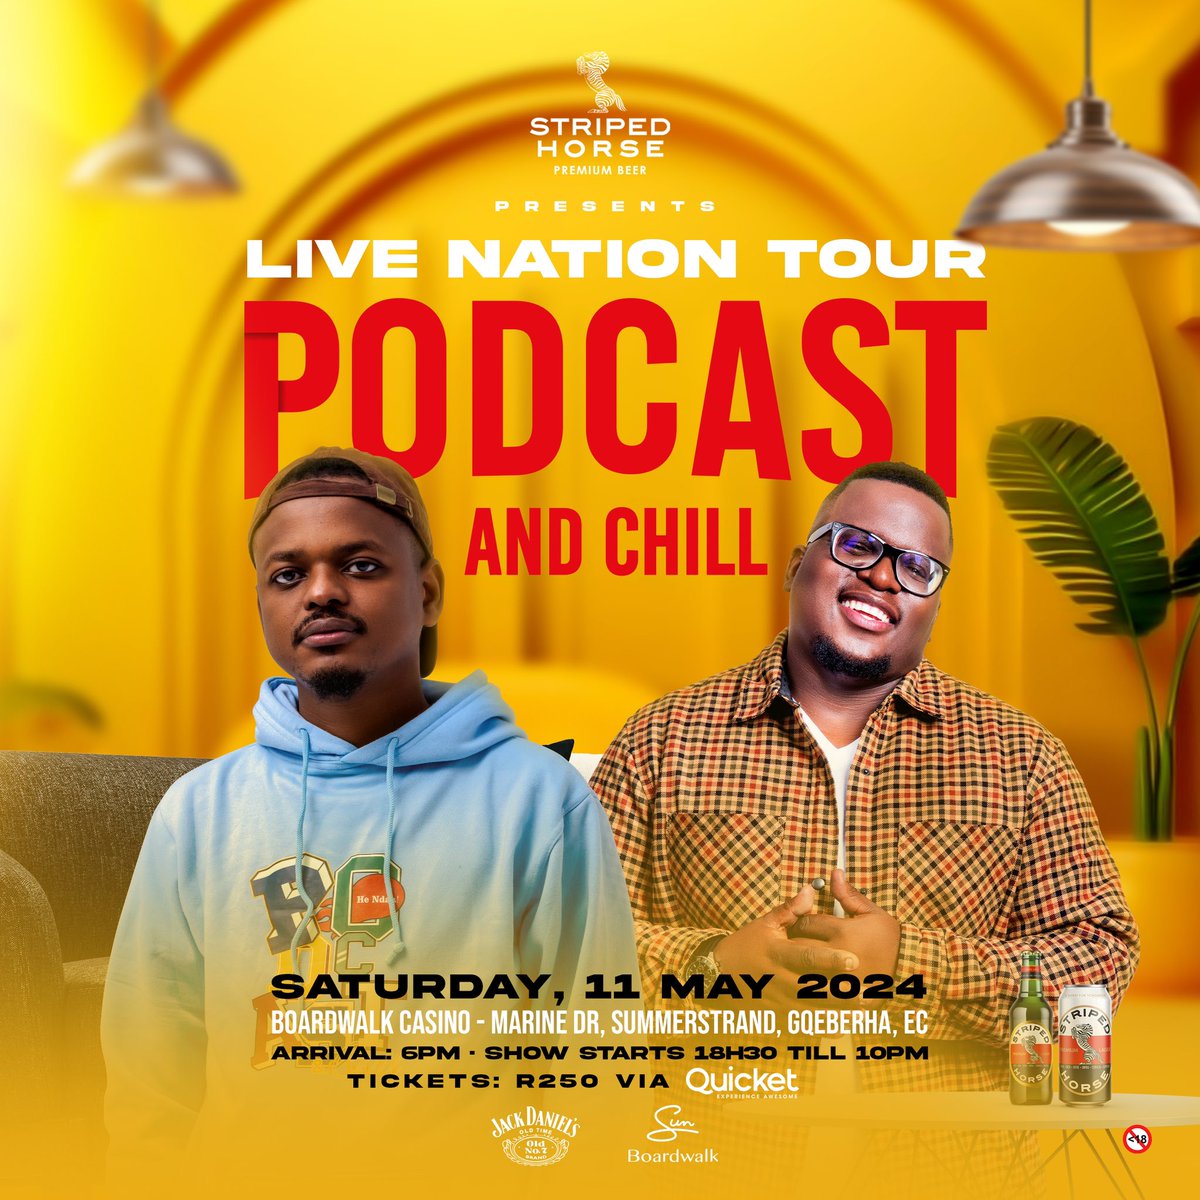 Let’s say make our way to Gqeberha ✈️

Zizokhala this weekend as the #podcastandchill crew make their way to Eastern Cape 📍

Tickets are selling fast and most of our shows have been sold out🔥 so to avoid missing out on the epic tour 🎫secure your spot at Quicket or click link…